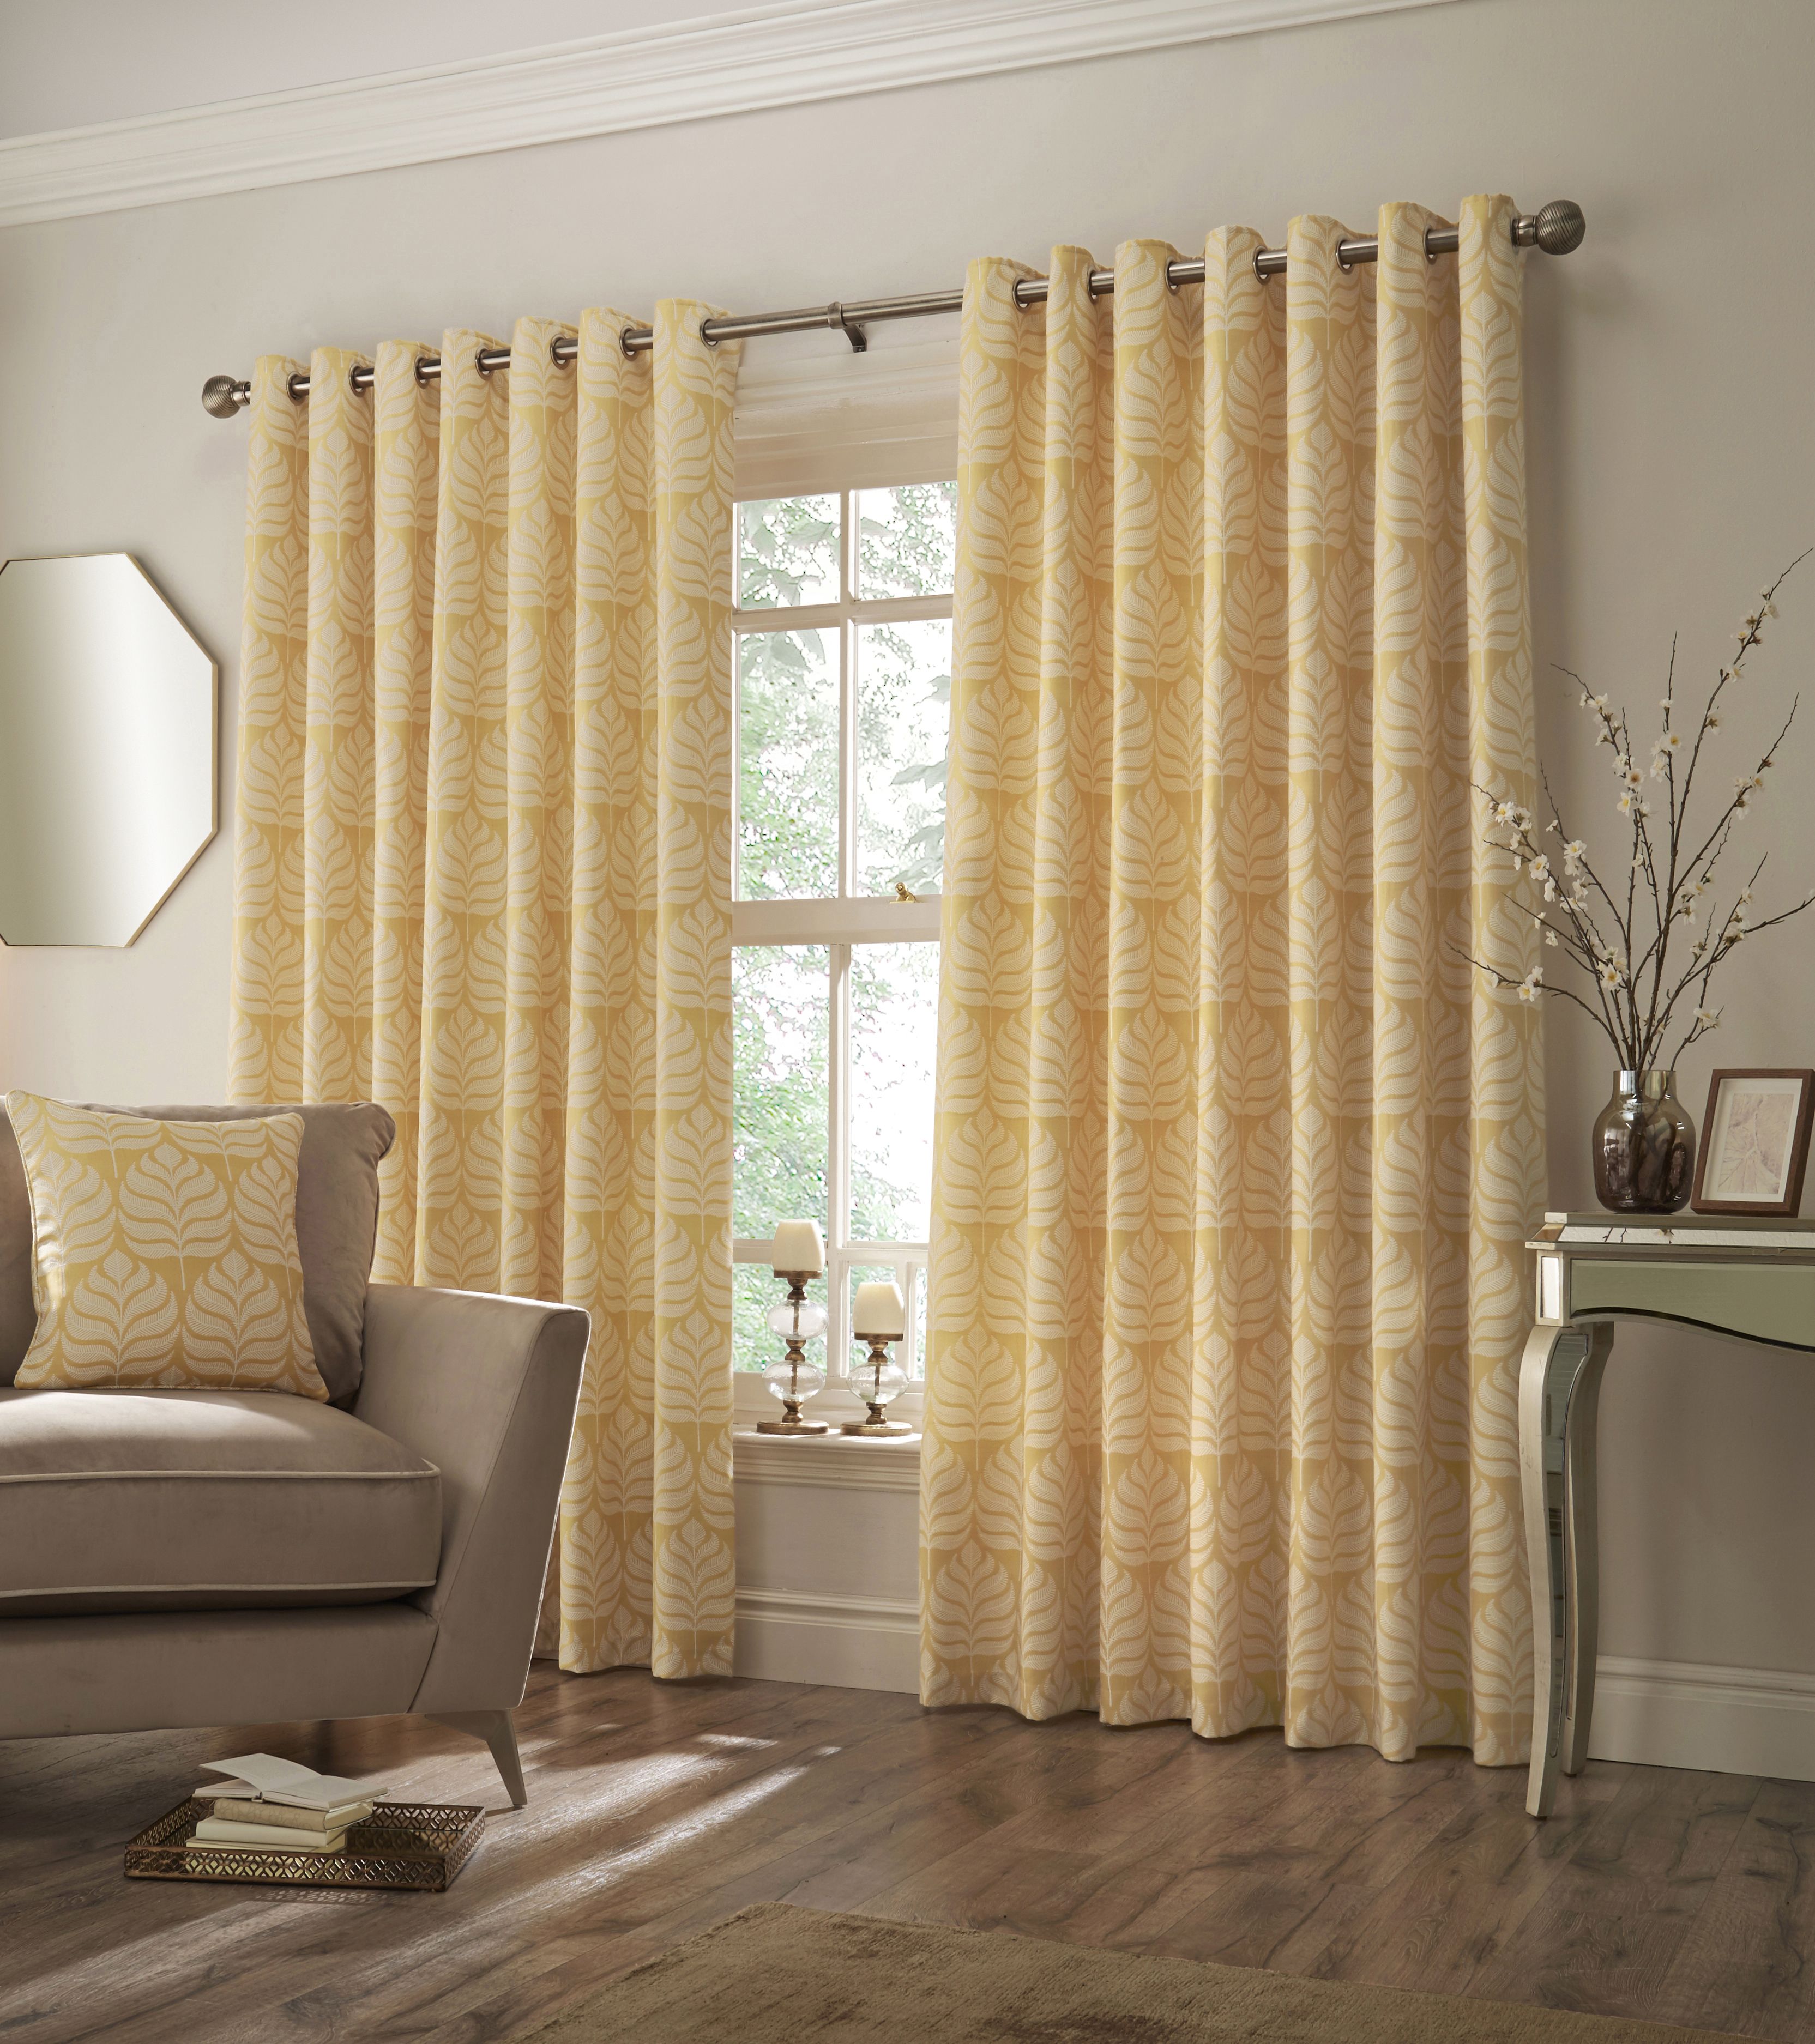 The Horto is sure to add a fresh, spring-like feel to any interior; with three tranquil colours and a luxurious jacquard botanical design. This curtain set is bound to get some attention!